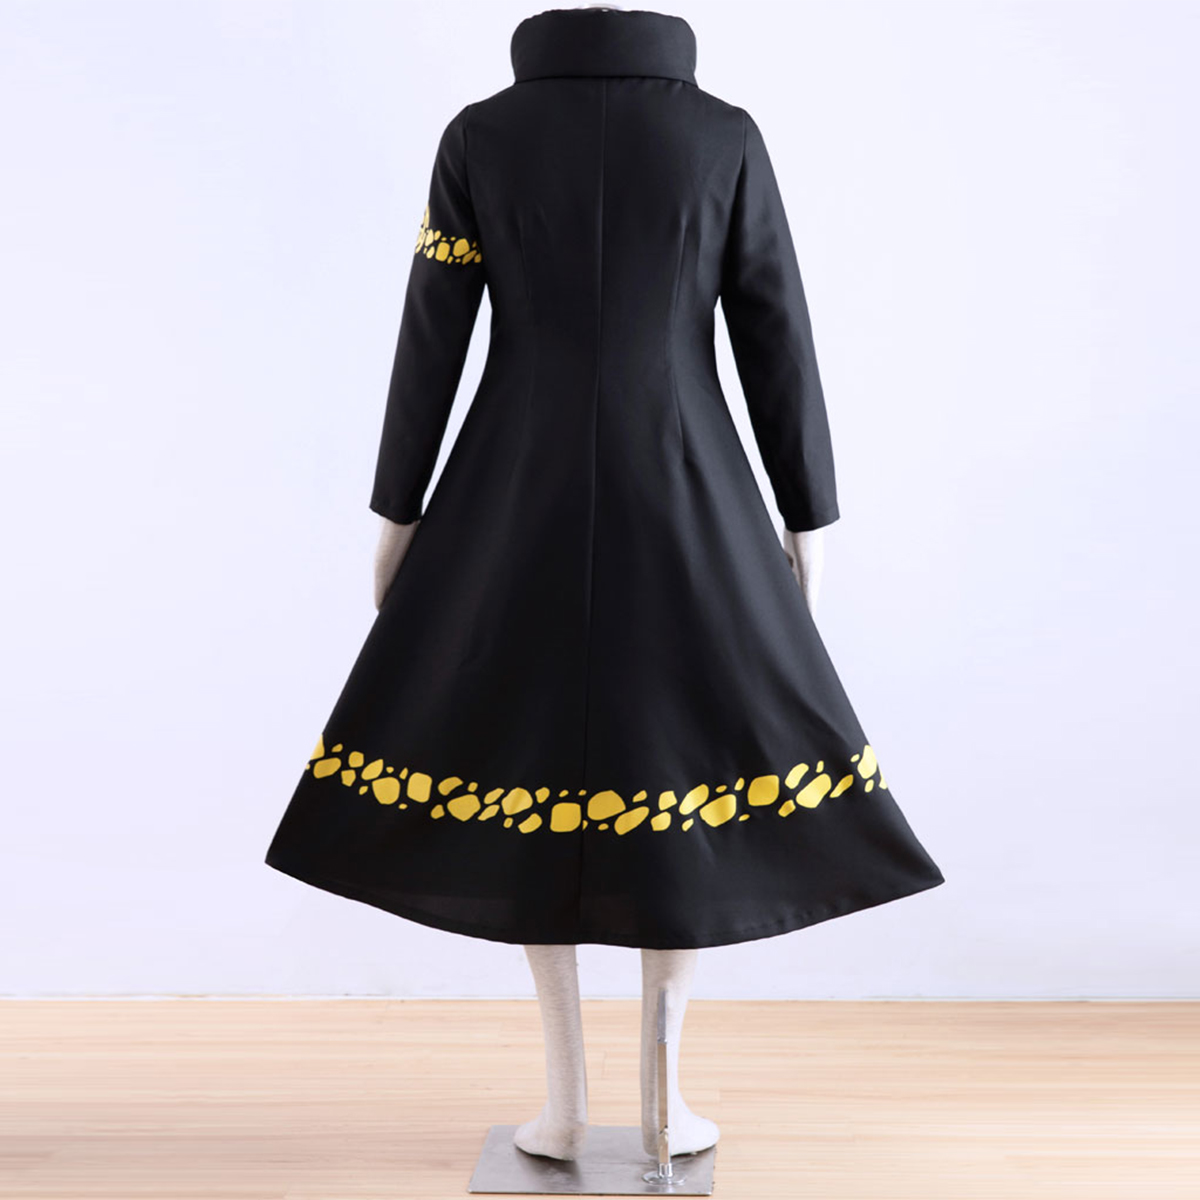 One Piece Trafalgar Law 2 Anime Cosplay Costumes Outfit